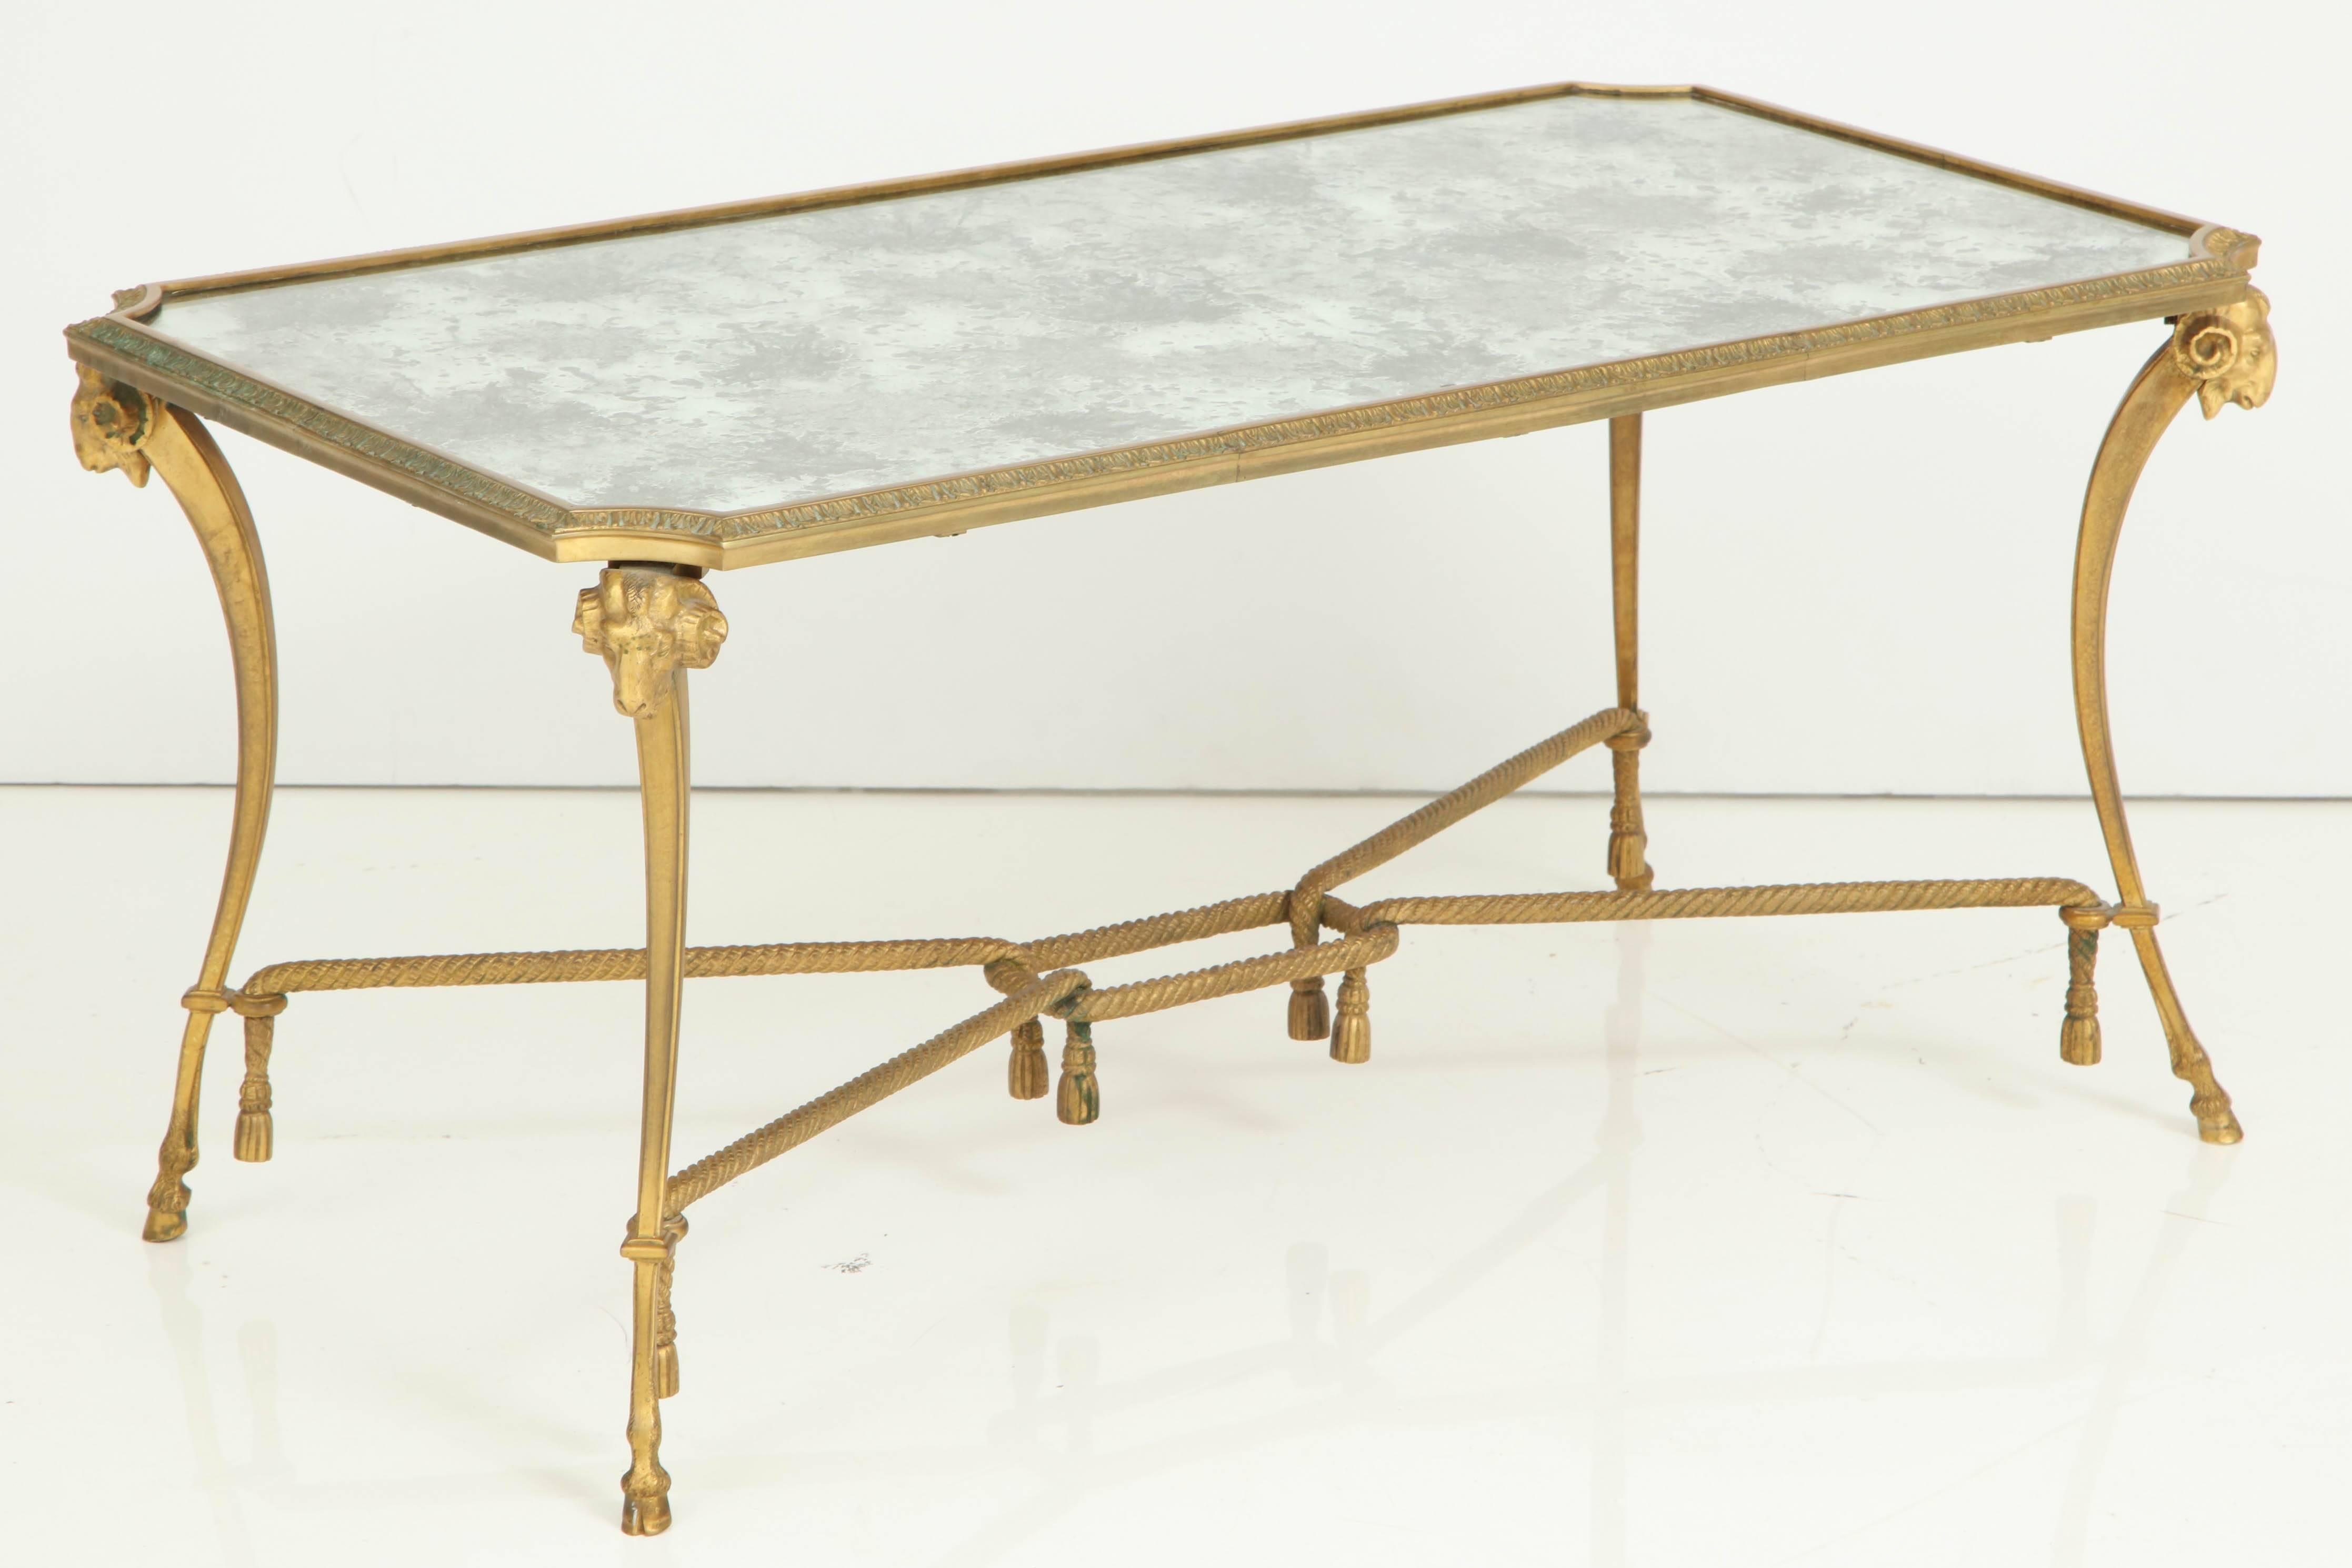 Empire style 1940s Baguès gilt bronze coffee table having distressed mirrored top, hoofed feet, scrolled supports with ram's head caps and tassel accents all joined by an h-stretcher.
         